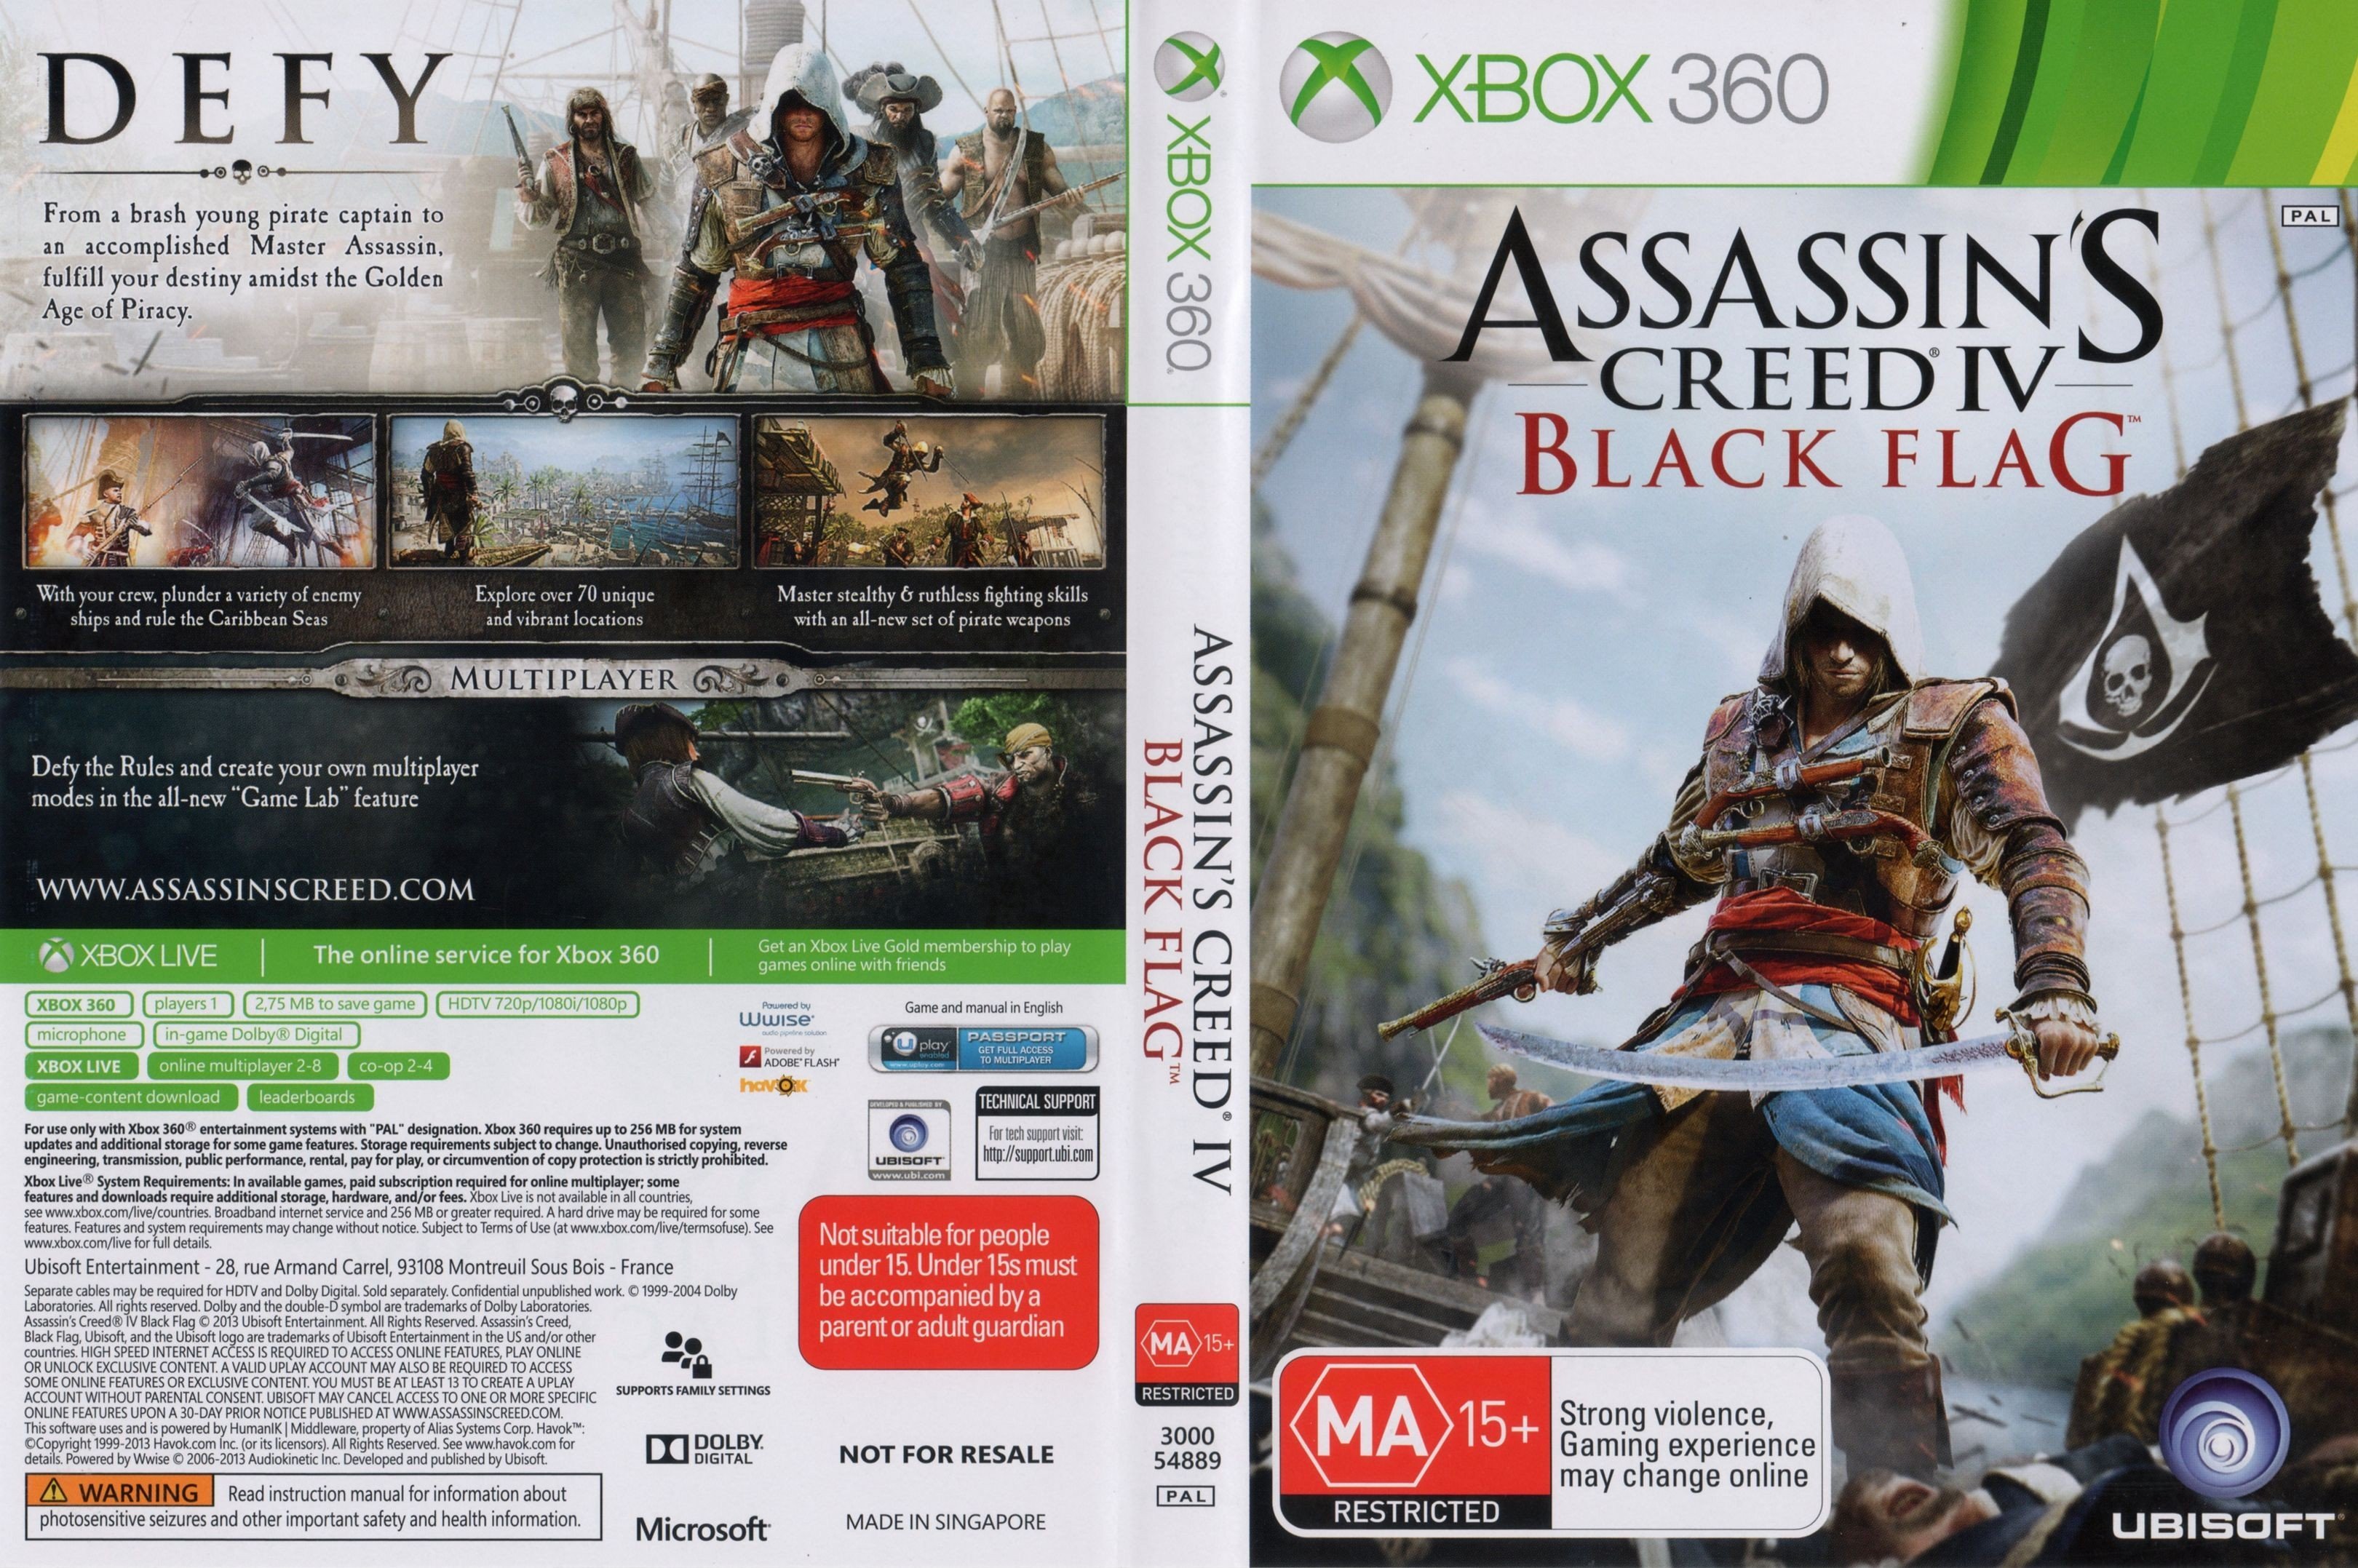 Assassin s xbox 360. Ассасин Крид 4 на Xbox 360. Assassin's Creed Xbox 360 диск. Assassins Creed 3 диск для Xbox 360. Assassin's Creed Black Flag Xbox 360.